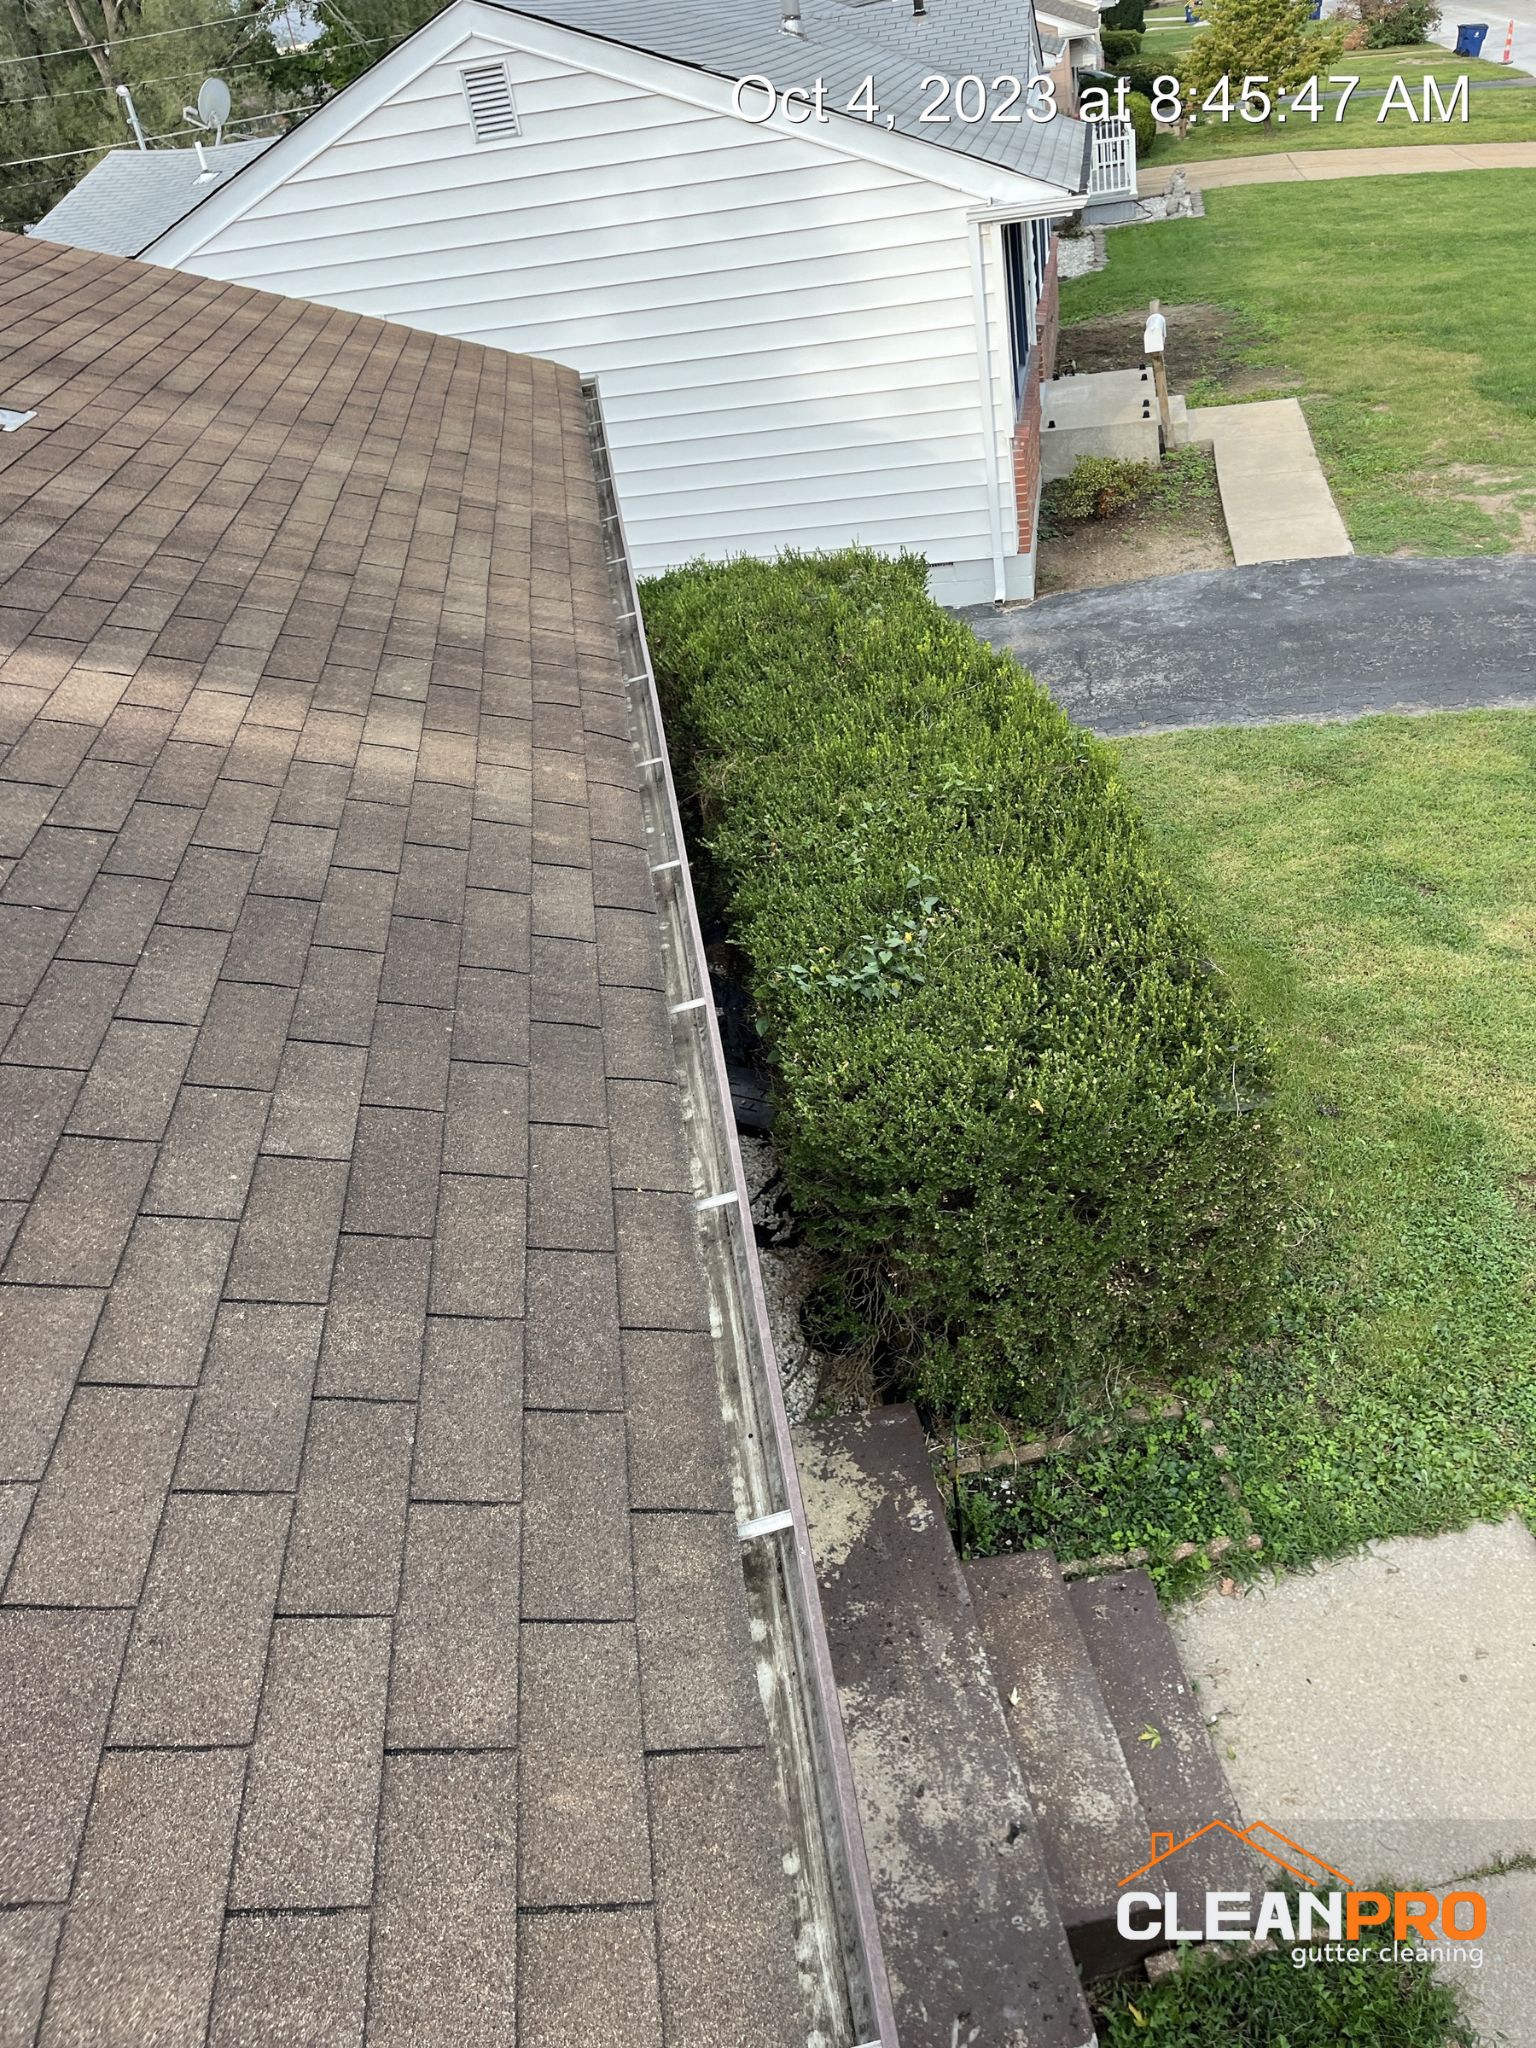 Quality Gutter Cleaning in Greenville NC